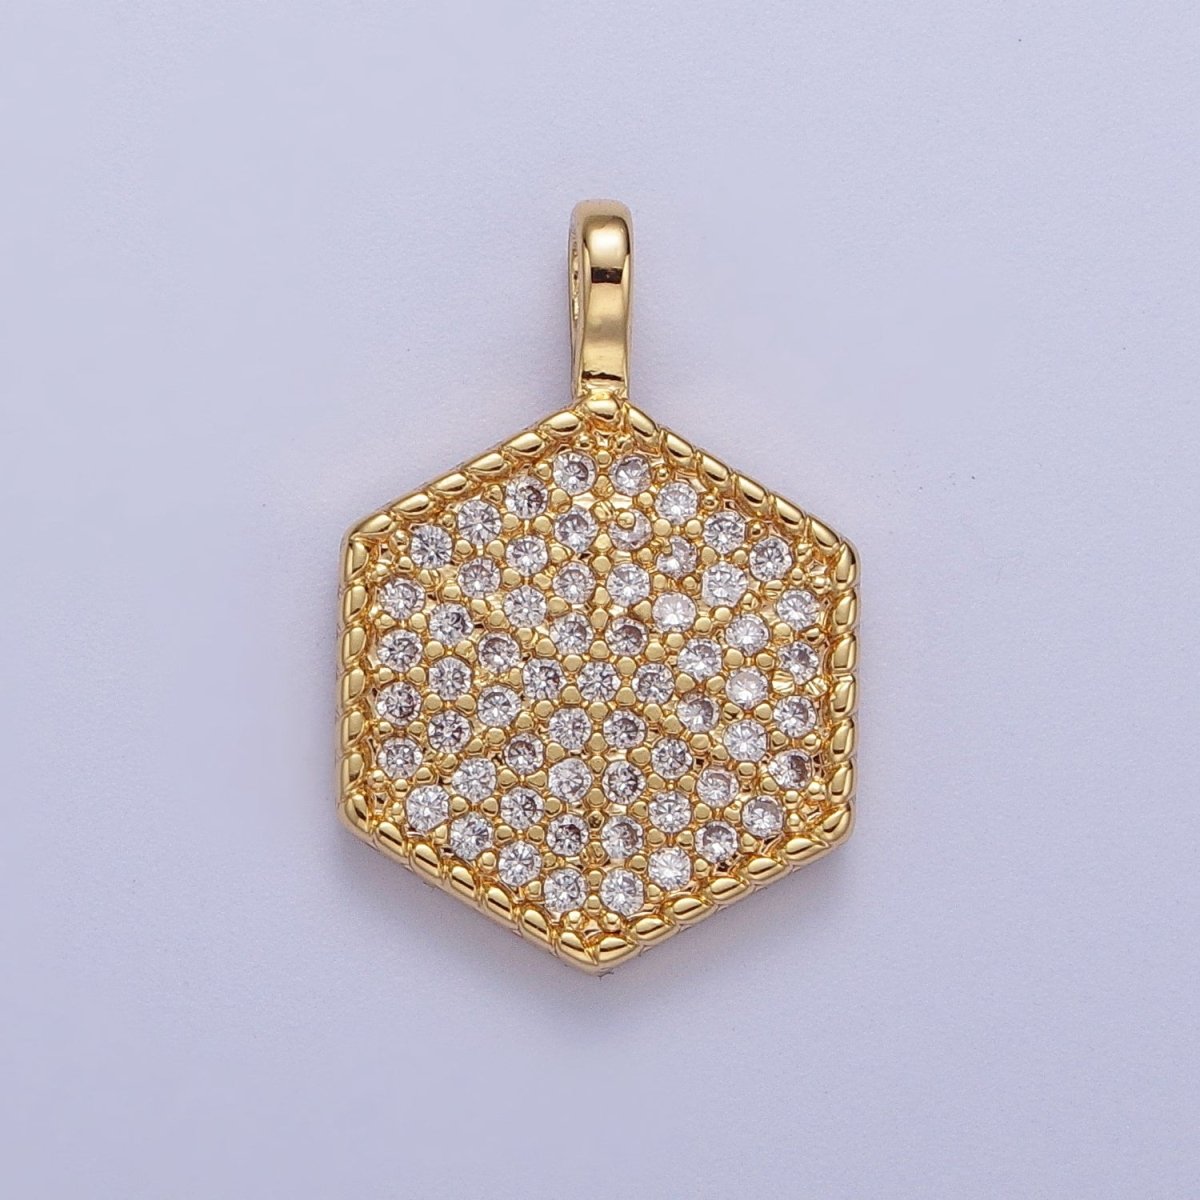 24K Gold Filled Micro Paved CZ Geometric Hexagonal Pendant For Jewelry Making H-466 - DLUXCA